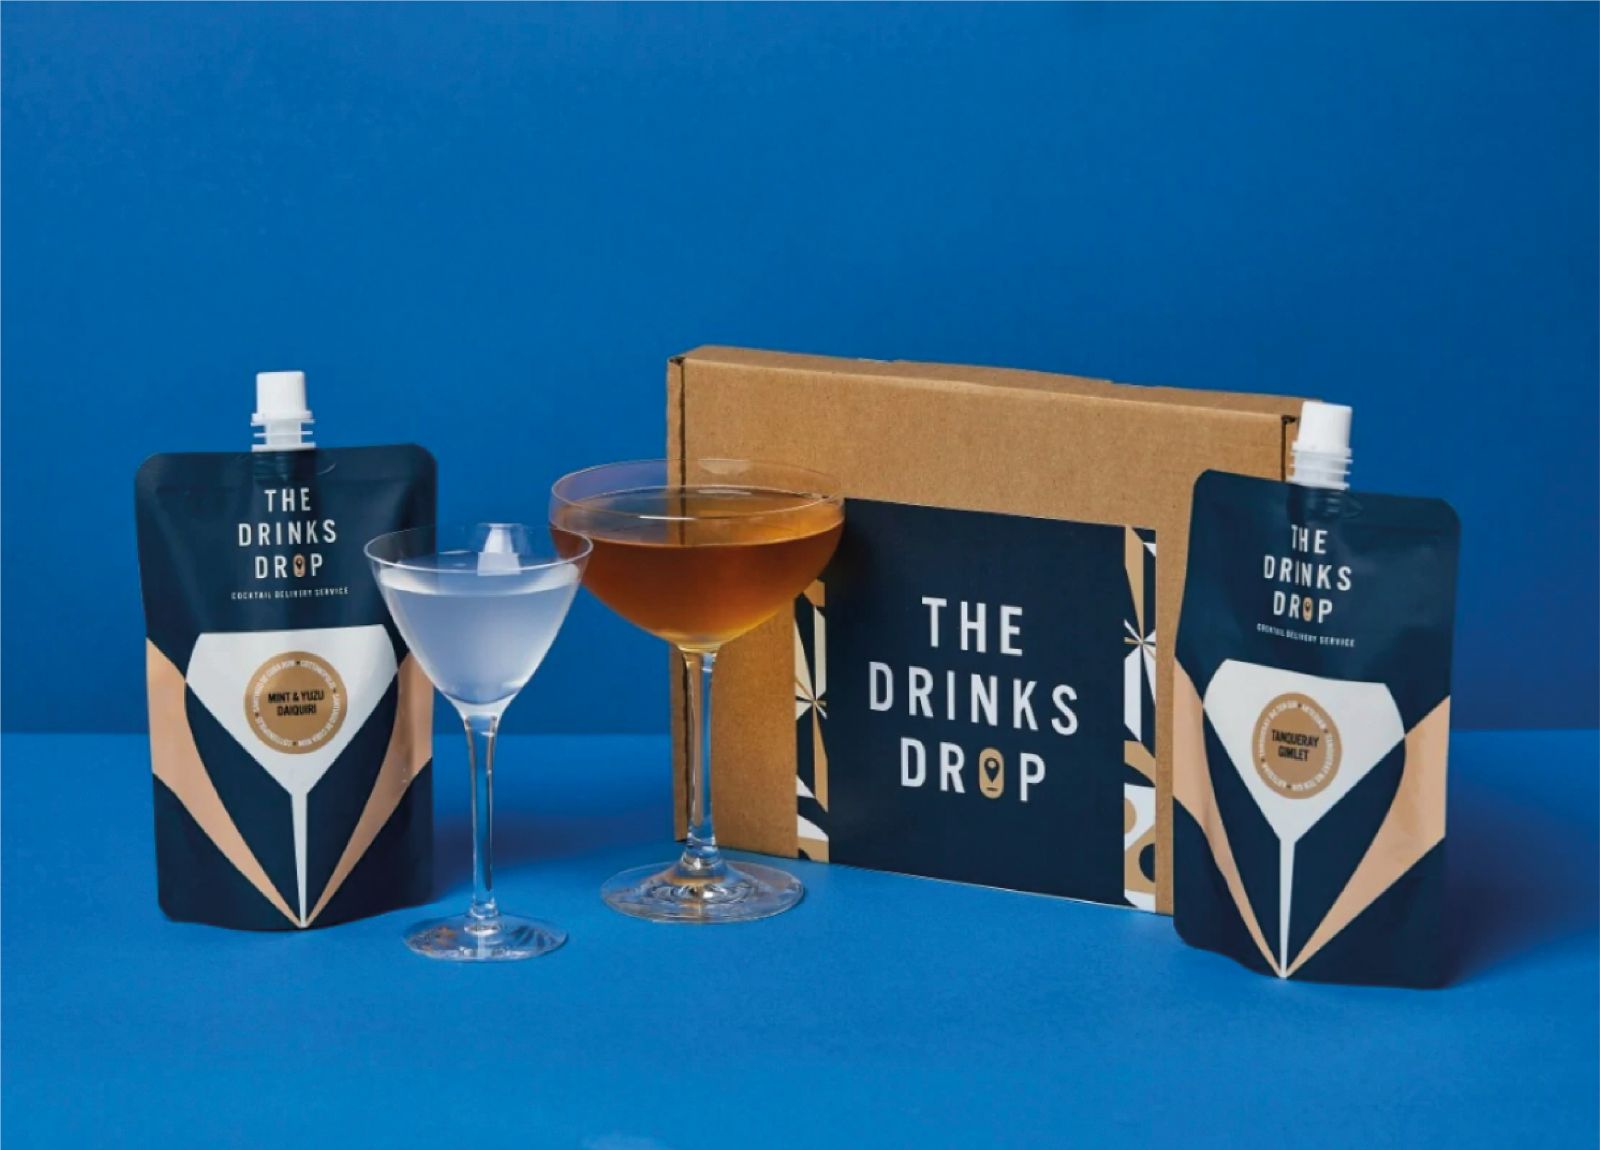 Drinks Drop monthly subscription - Margaritas, martinis, negronis and more, your box will be filled with favourites from the core menu, limited-edition drinks and exclusive cocktails for our subscription members only.